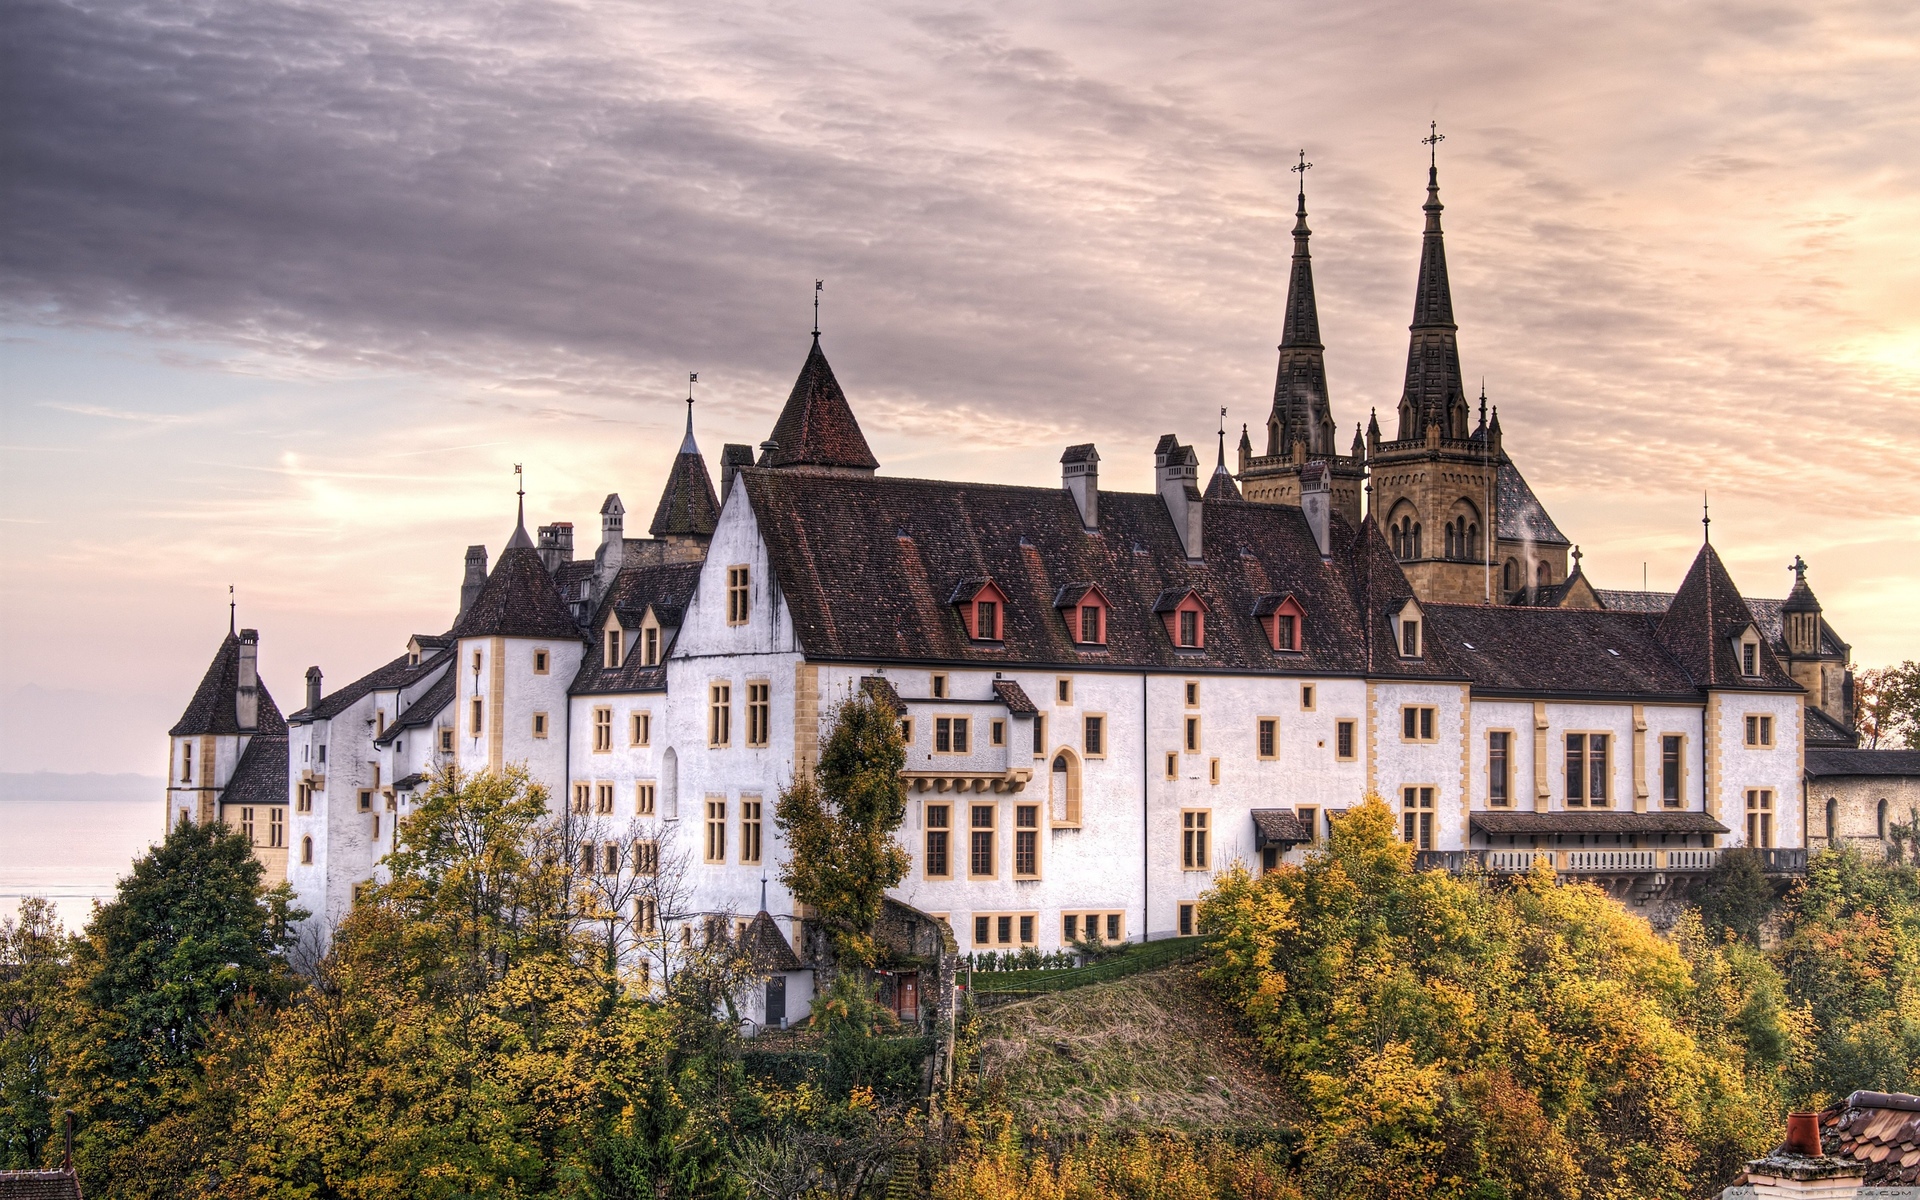 neuchatel, Castle, Switzerland, Architecture, Buildings, Castle, Sky, Clouds, Hills, Mountains, Trees, Landscapes, Tower, Spire, Autumn, Fall, Seasons, Window, Leaves, Scenic, Roofsunlight Wallpaper